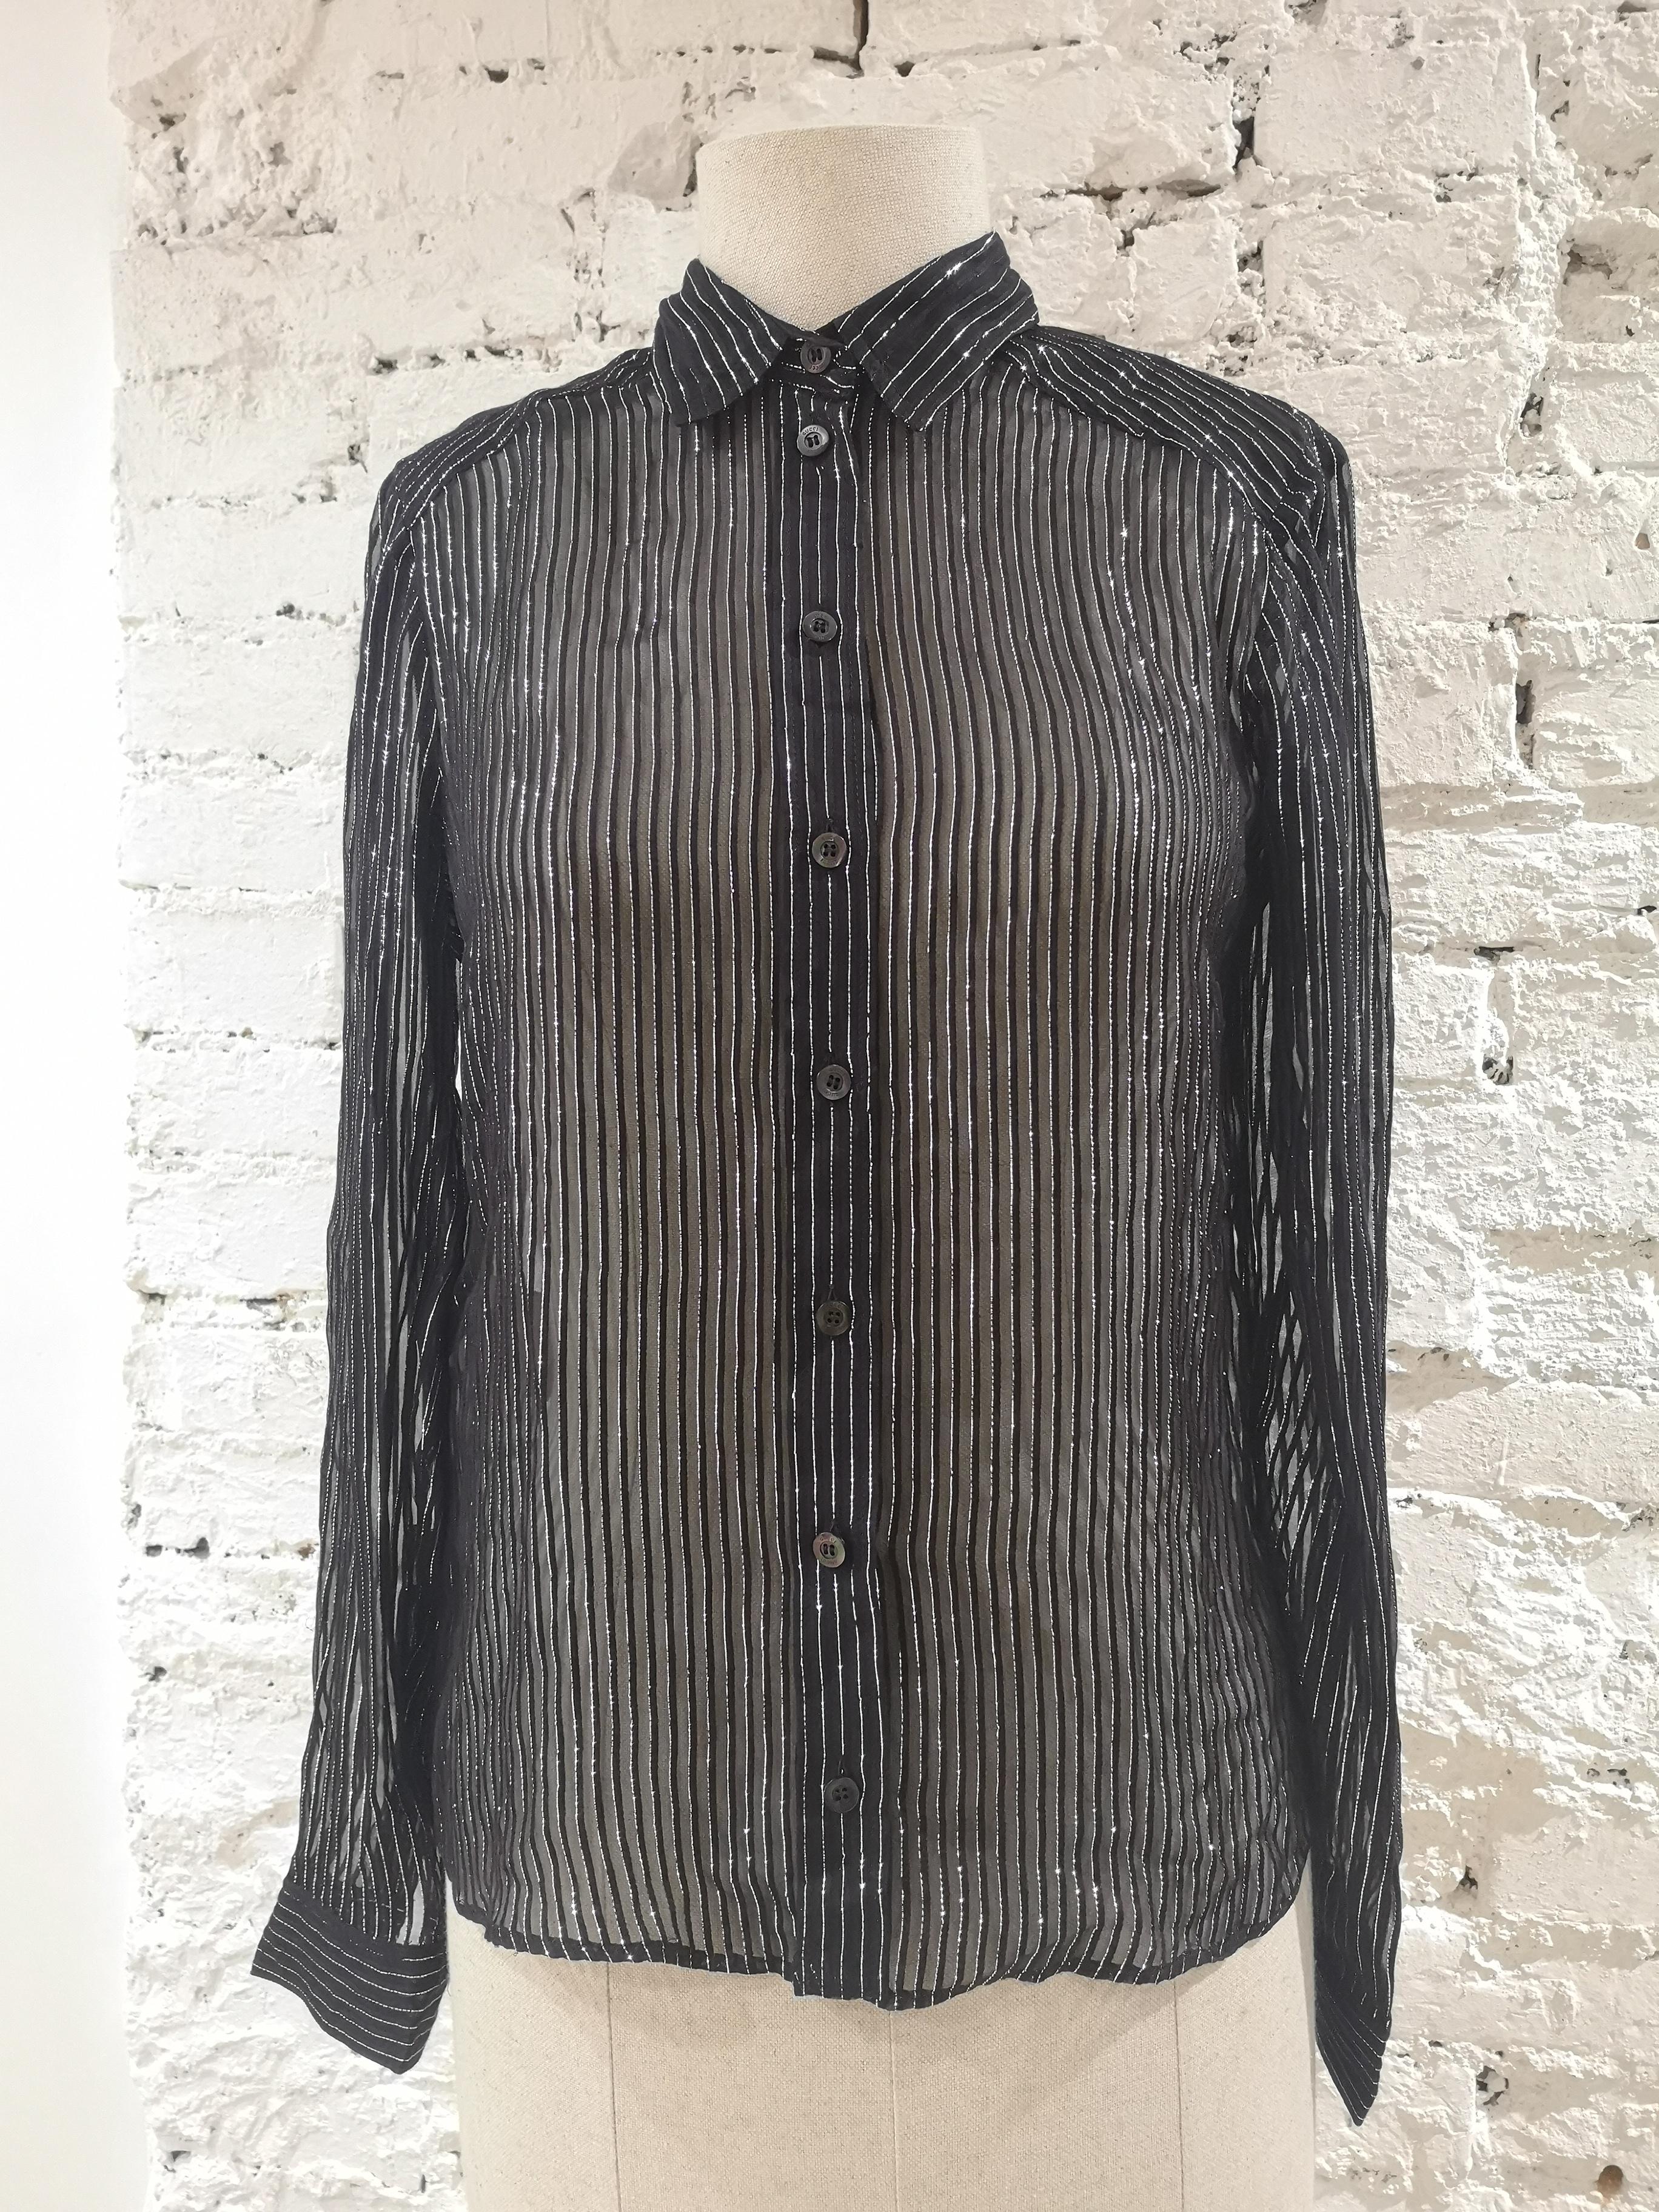 Gucci black silver see-through silk shirt
Gucci by Tom Ford black see-through shirt with silver stripes
totally made in italy in size 40